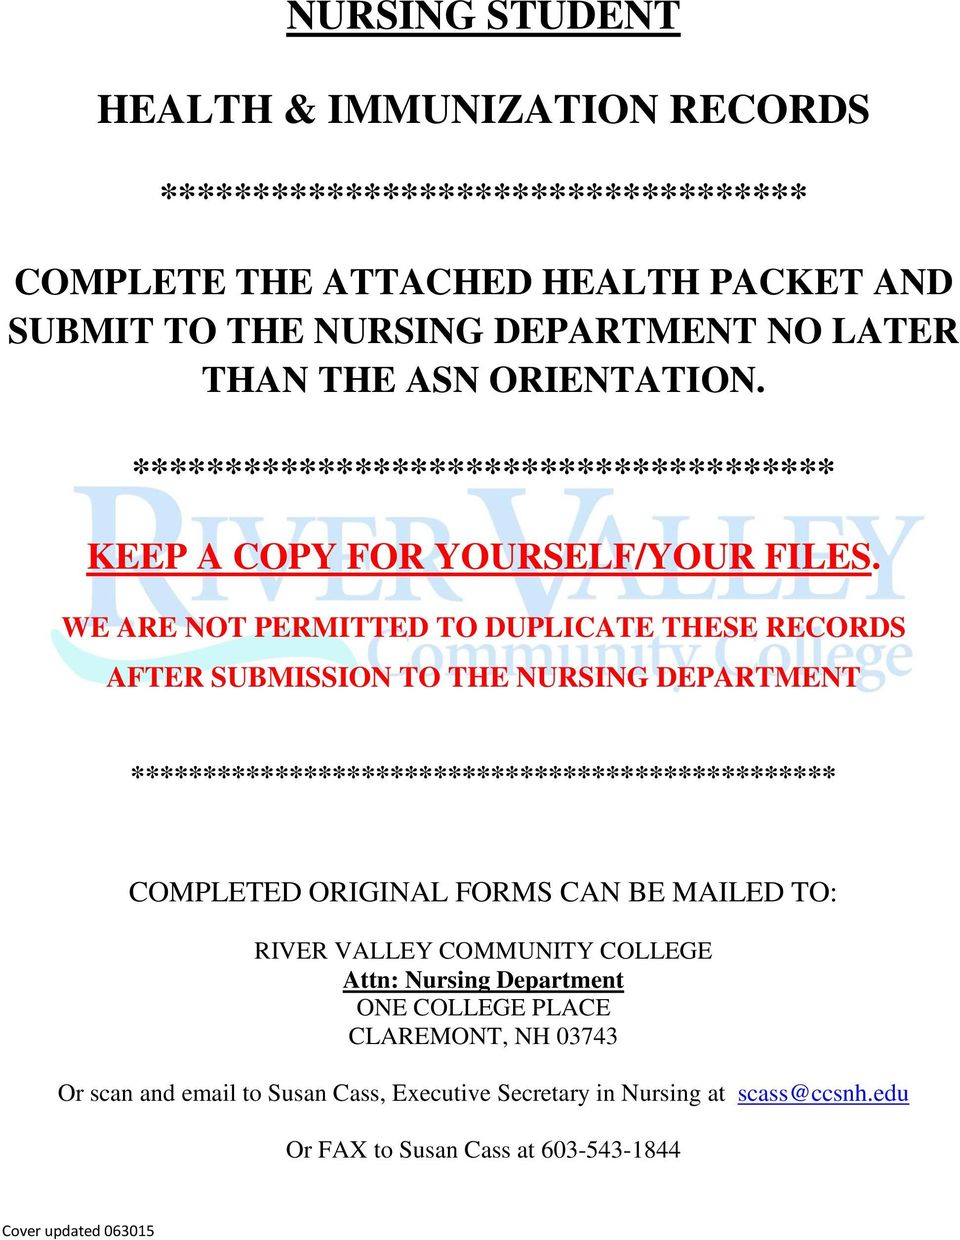 WE ARE NOT PERMITTED TO DUPLICATE THESE RECORDS AFTER SUBMISSION TO THE NURSING DEPARTMENT ************************************************* COMPLETED ORIGINAL FORMS CAN